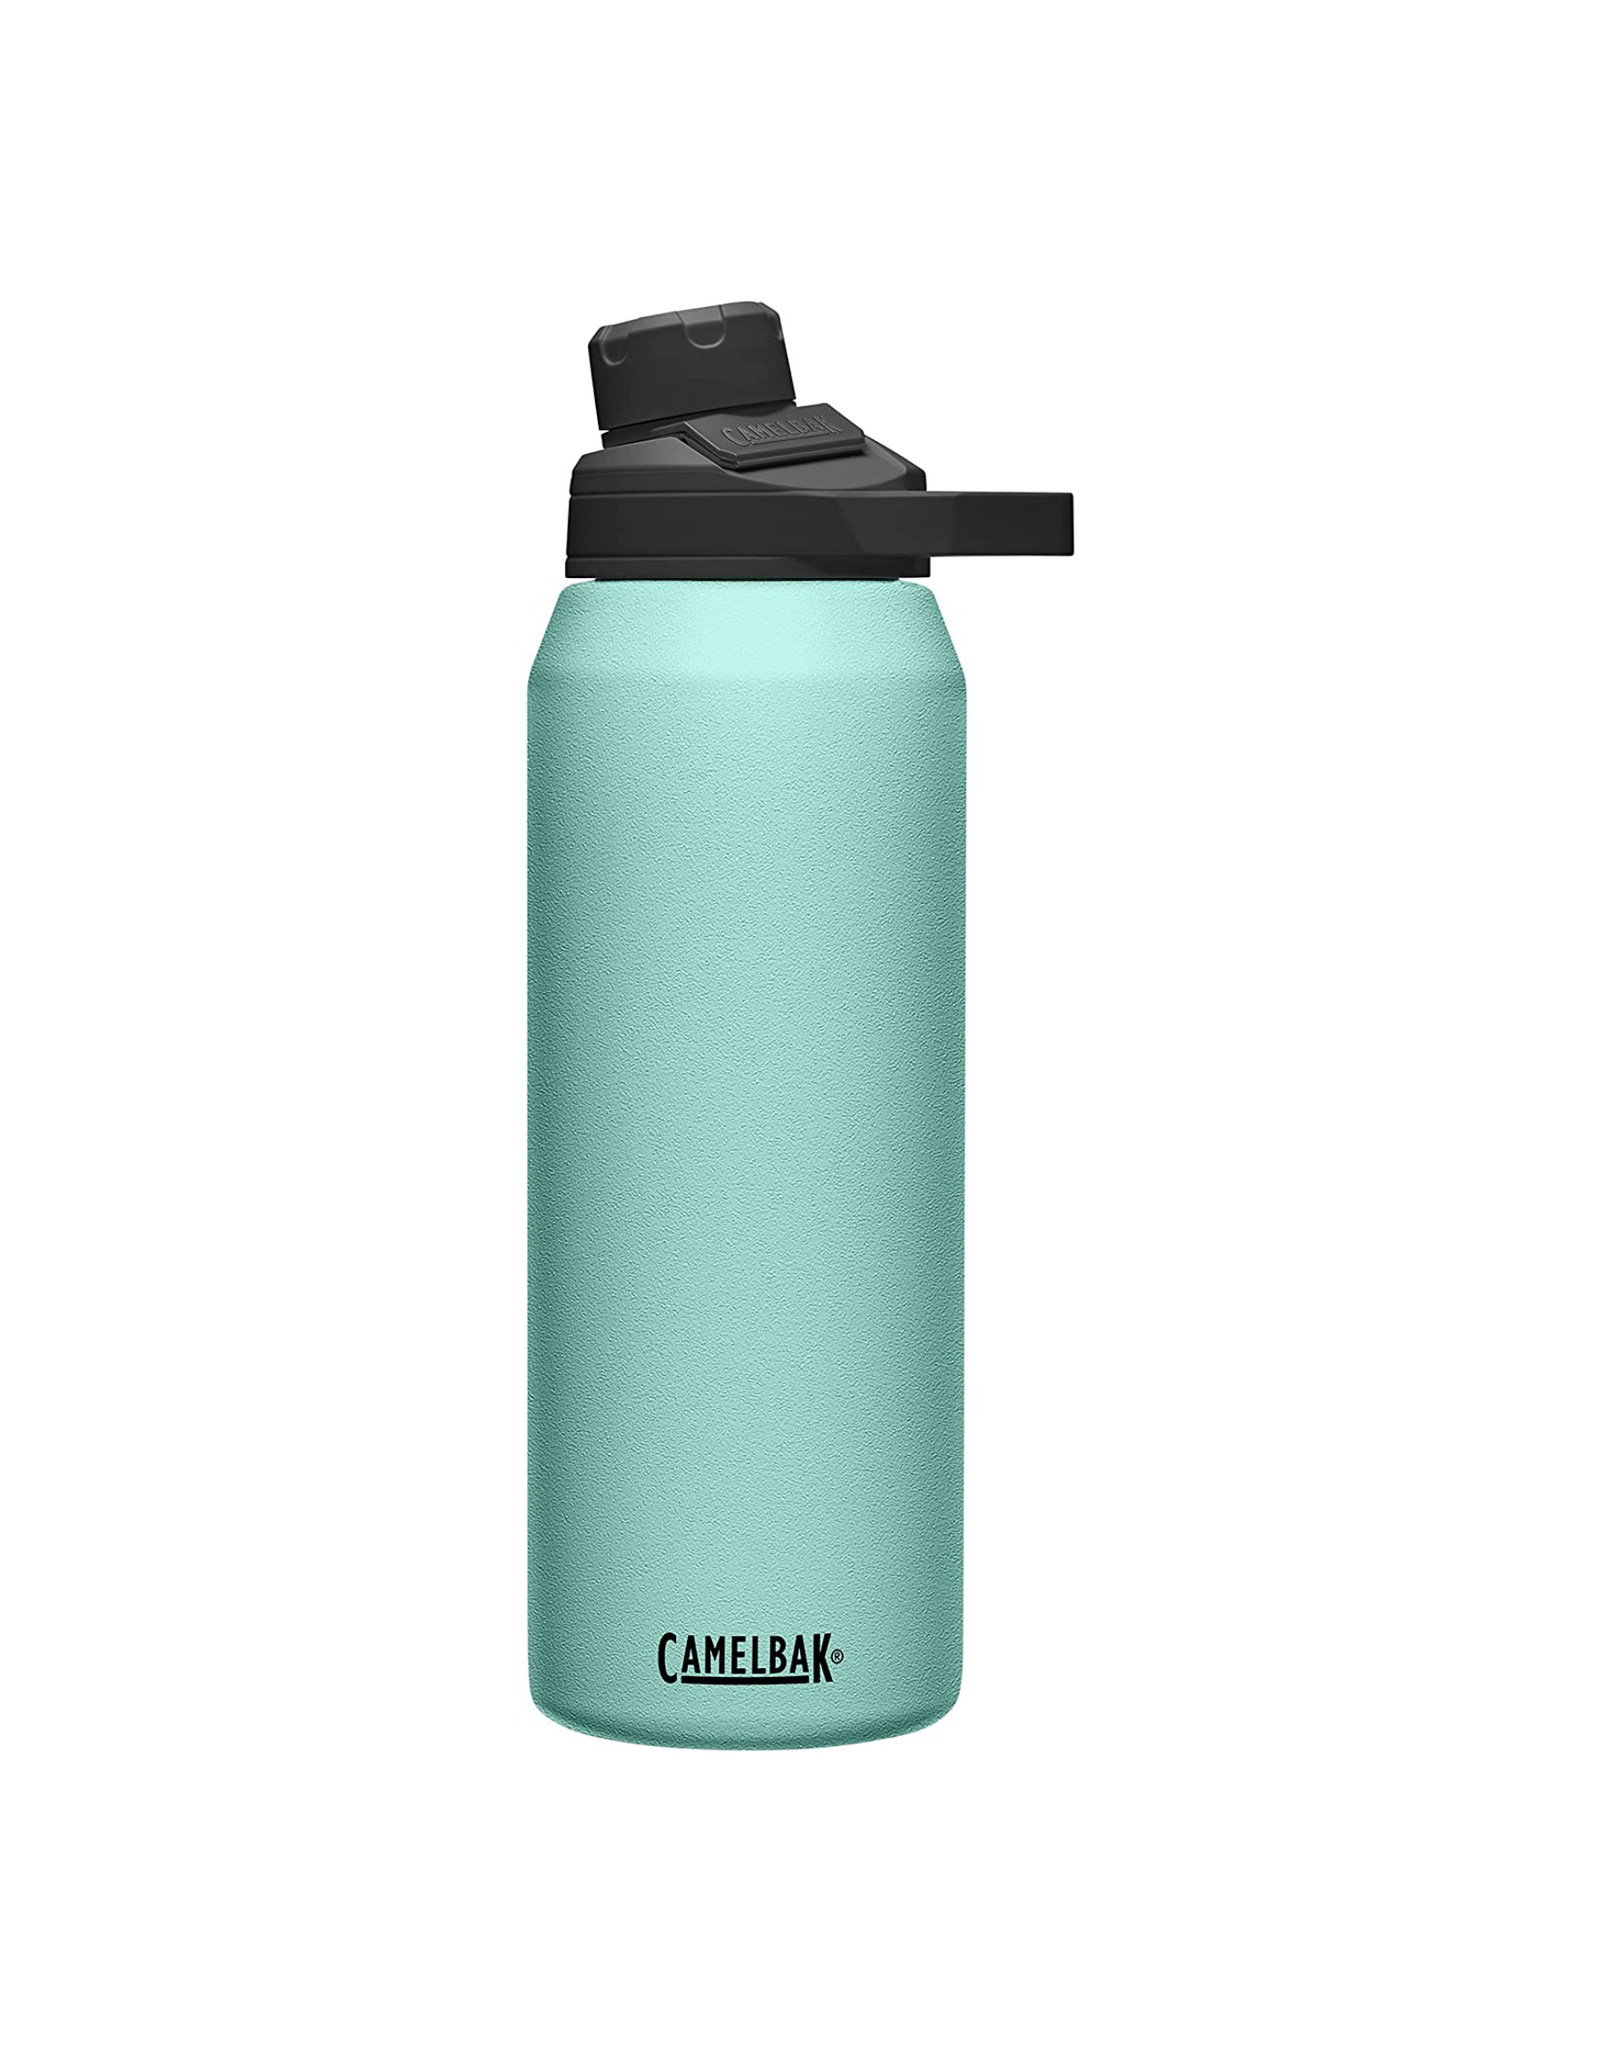 CamelBak Chute Mag Water Bottle, Insulated Stainless Steel, 32 oz, Coastal